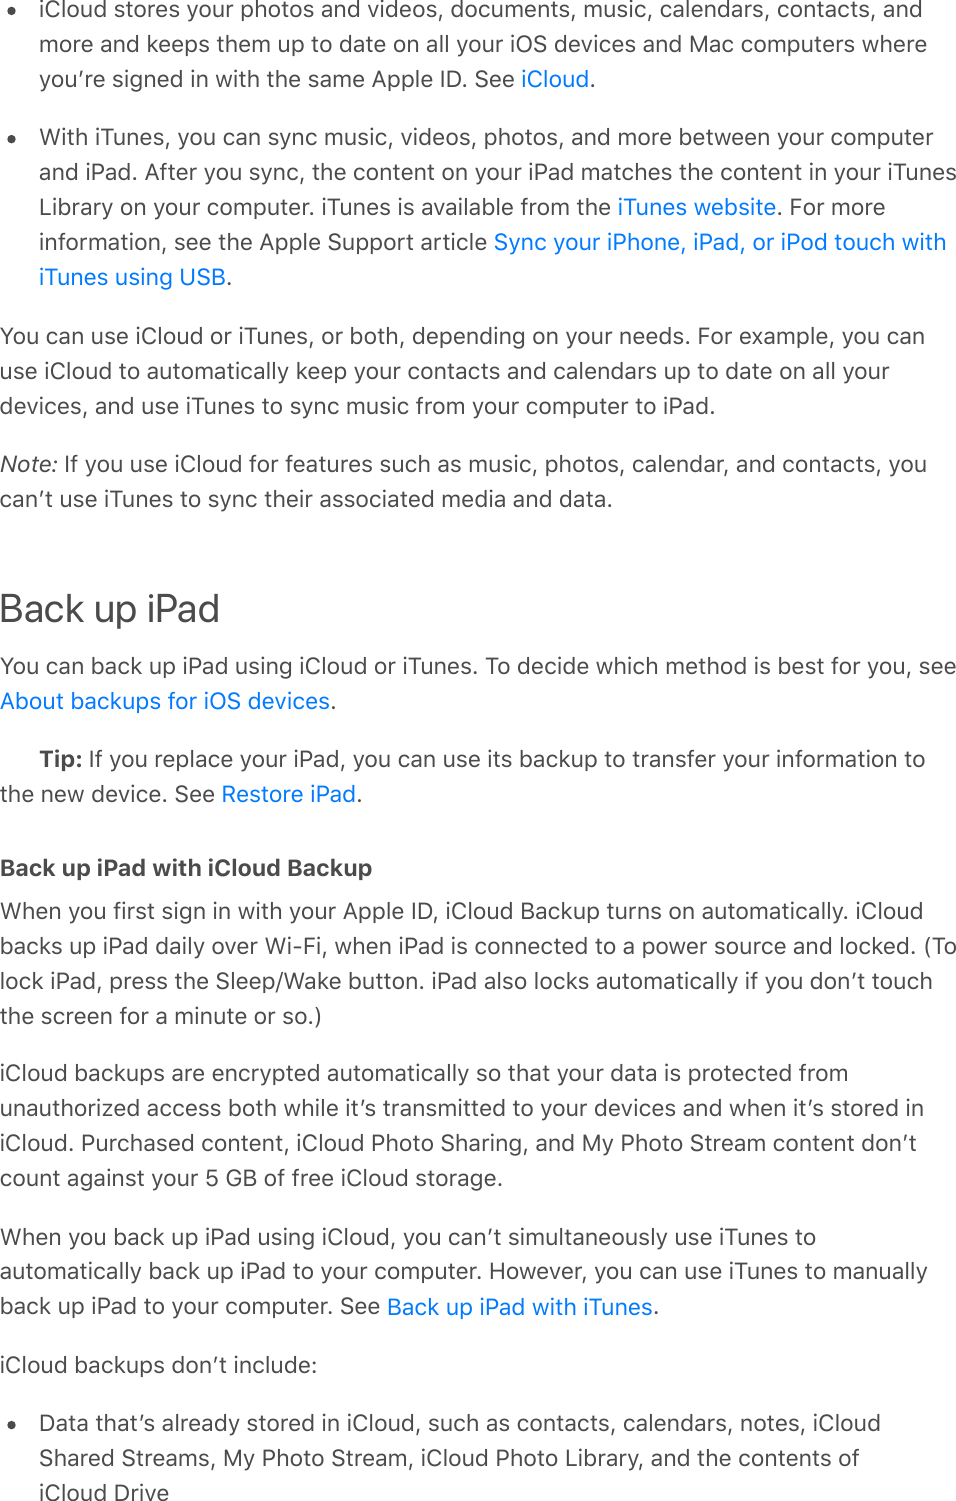 iCloud stores your photos and videos, documents, music, calendars, contacts, andmore and keeps them up to date on all your iOS devices and Mac computers whereyouʼre signed in with the same Apple ID. See  .With iTunes, you can sync music, videos, photos, and more between your computerand iPad. After you sync, the content on your iPad matches the content in your iTunesLibrary on your computer. iTunes is available from the  . For moreinformation, see the Apple Support article .You can use iCloud or iTunes, or both, depending on your needs. For example, you canuse iCloud to automatically keep your contacts and calendars up to date on all yourdevices, and use iTunes to sync music from your computer to iPad.Note: If you use iCloud for features such as music, photos, calendar, and contacts, youcanʼt use iTunes to sync their associated media and data.Back up iPadYou can back up iPad using iCloud or iTunes. To decide which method is best for you, see.Tip: If you replace your iPad, you can use its backup to transfer your information tothe new device. See  .Back up iPad with iCloud BackupWhen you first sign in with your Apple ID, iCloud Backup turns on automatically. iCloudbacks up iPad daily over Wi-Fi, when iPad is connected to a power source and locked. (Tolock iPad, press the Sleep/Wake button. iPad also locks automatically if you donʼt touchthe screen for a minute or so.)iCloud backups are encrypted automatically so that your data is protected fromunauthorized access both while itʼs transmitted to your devices and when itʼs stored iniCloud. Purchased content, iCloud Photo Sharing, and My Photo Stream content donʼtcount against your 5 GB of free iCloud storage.When you back up iPad using iCloud, you canʼt simultaneously use iTunes toautomatically back up iPad to your computer. However, you can use iTunes to manuallyback up iPad to your computer. See  .iCloud backups donʼt include:Data thatʼs already stored in iCloud, such as contacts, calendars, notes, iCloudShared Streams, My Photo Stream, iCloud Photo Library, and the contents ofiCloud DriveiCloudiTunes websiteSync your iPhone, iPad, or iPod touch withiTunes using USBAbout backups for iOS devicesRestore iPadBack up iPad with iTunes